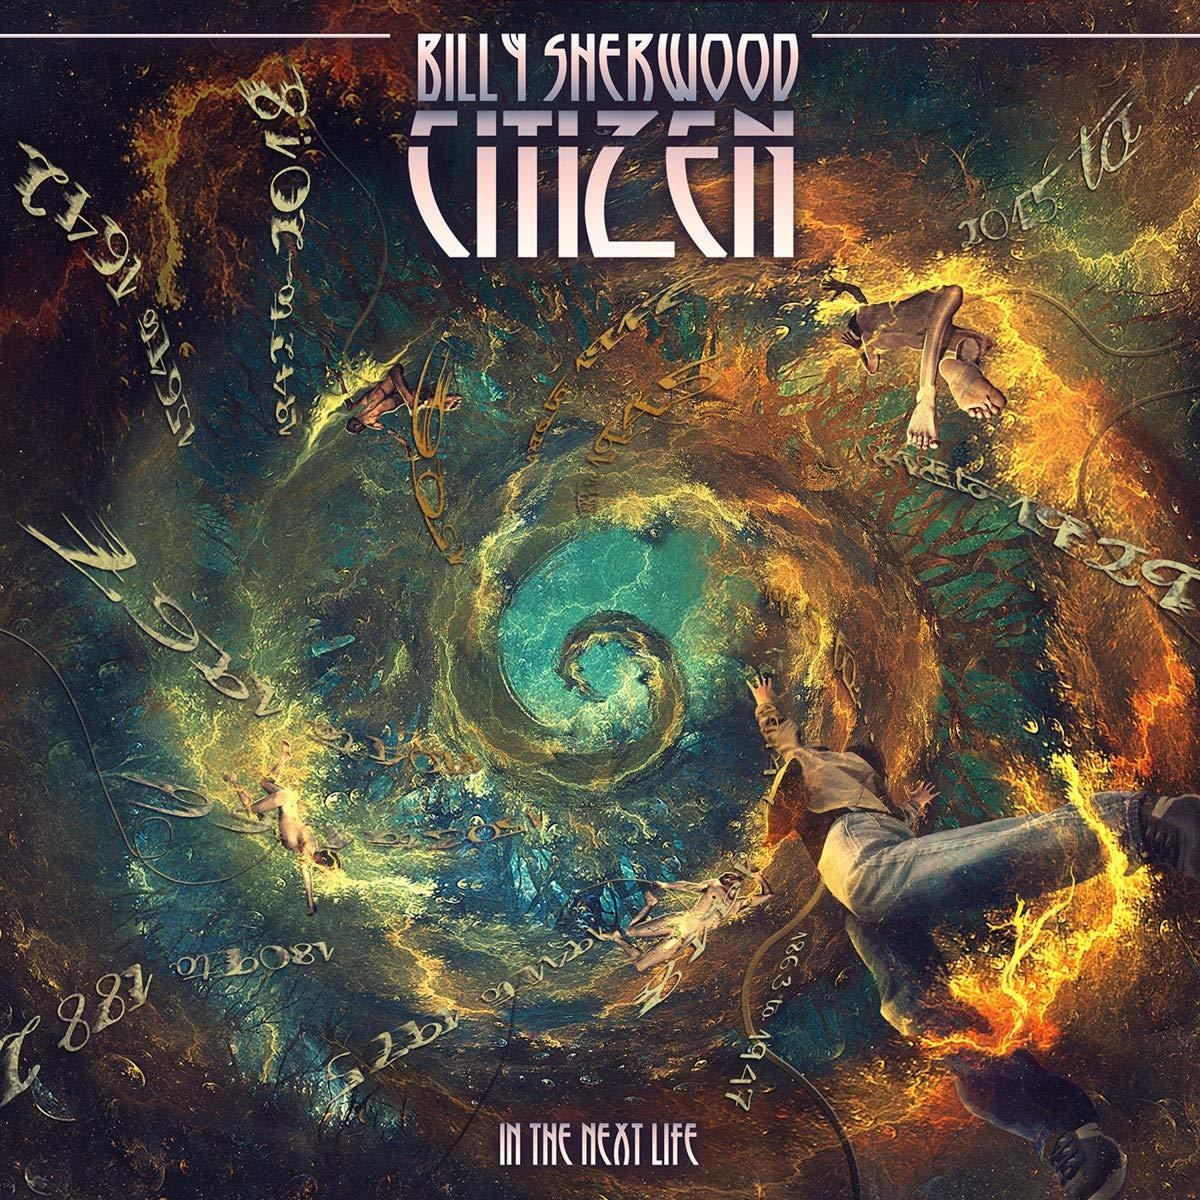 Billy Sherwood - CITIZEN: (CD) LIFE THE IN NEXT 